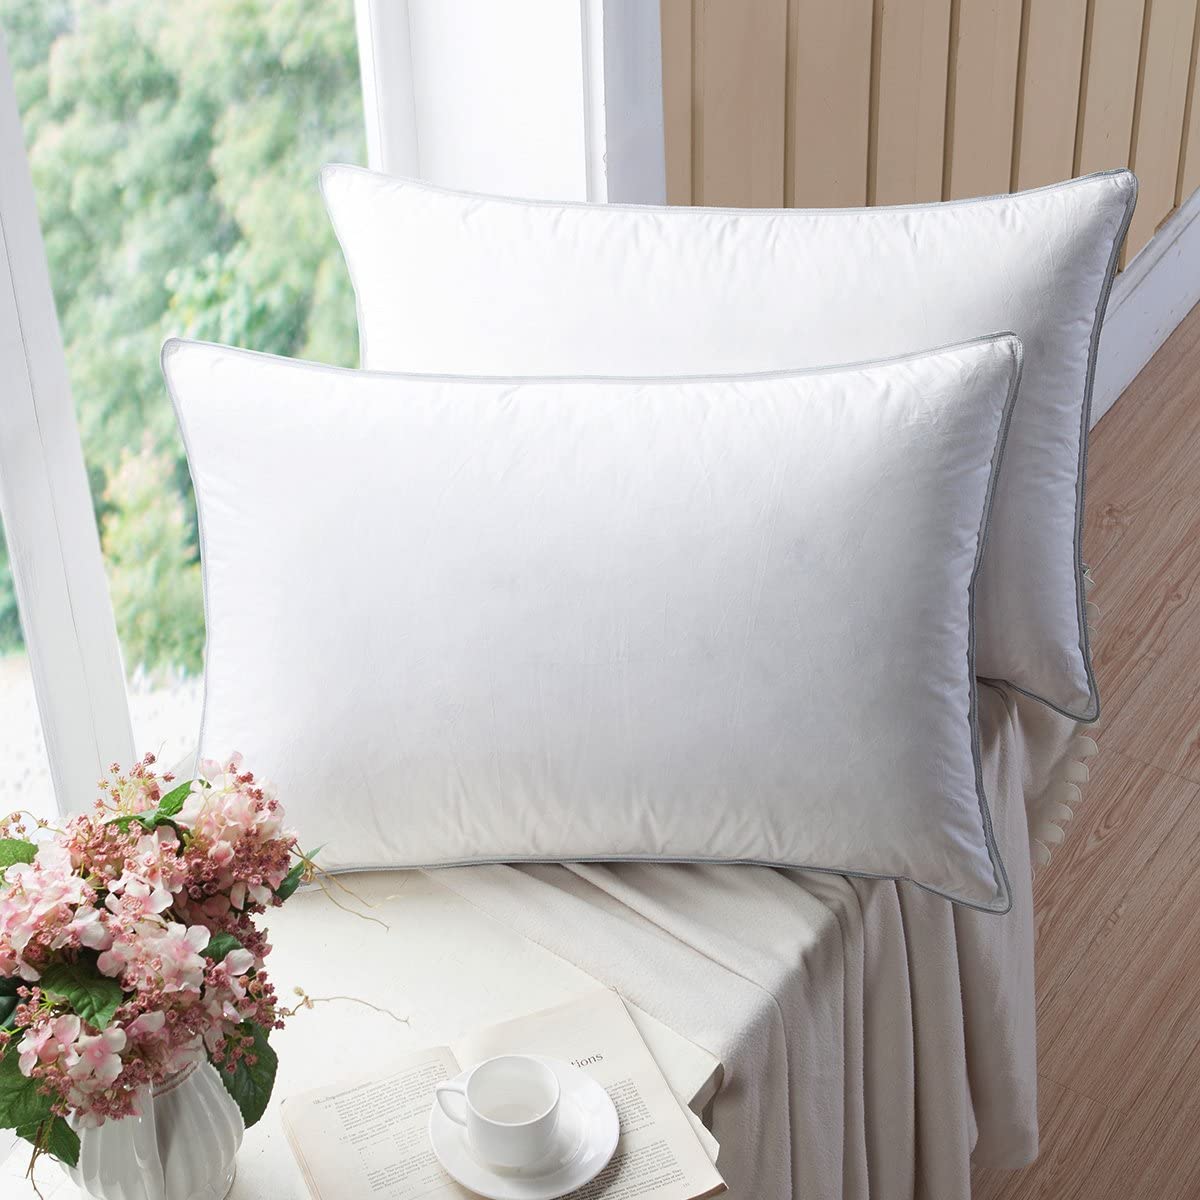 WhatsBedding Hotel Collection Natural Goose Down Pillows, 2-Pack